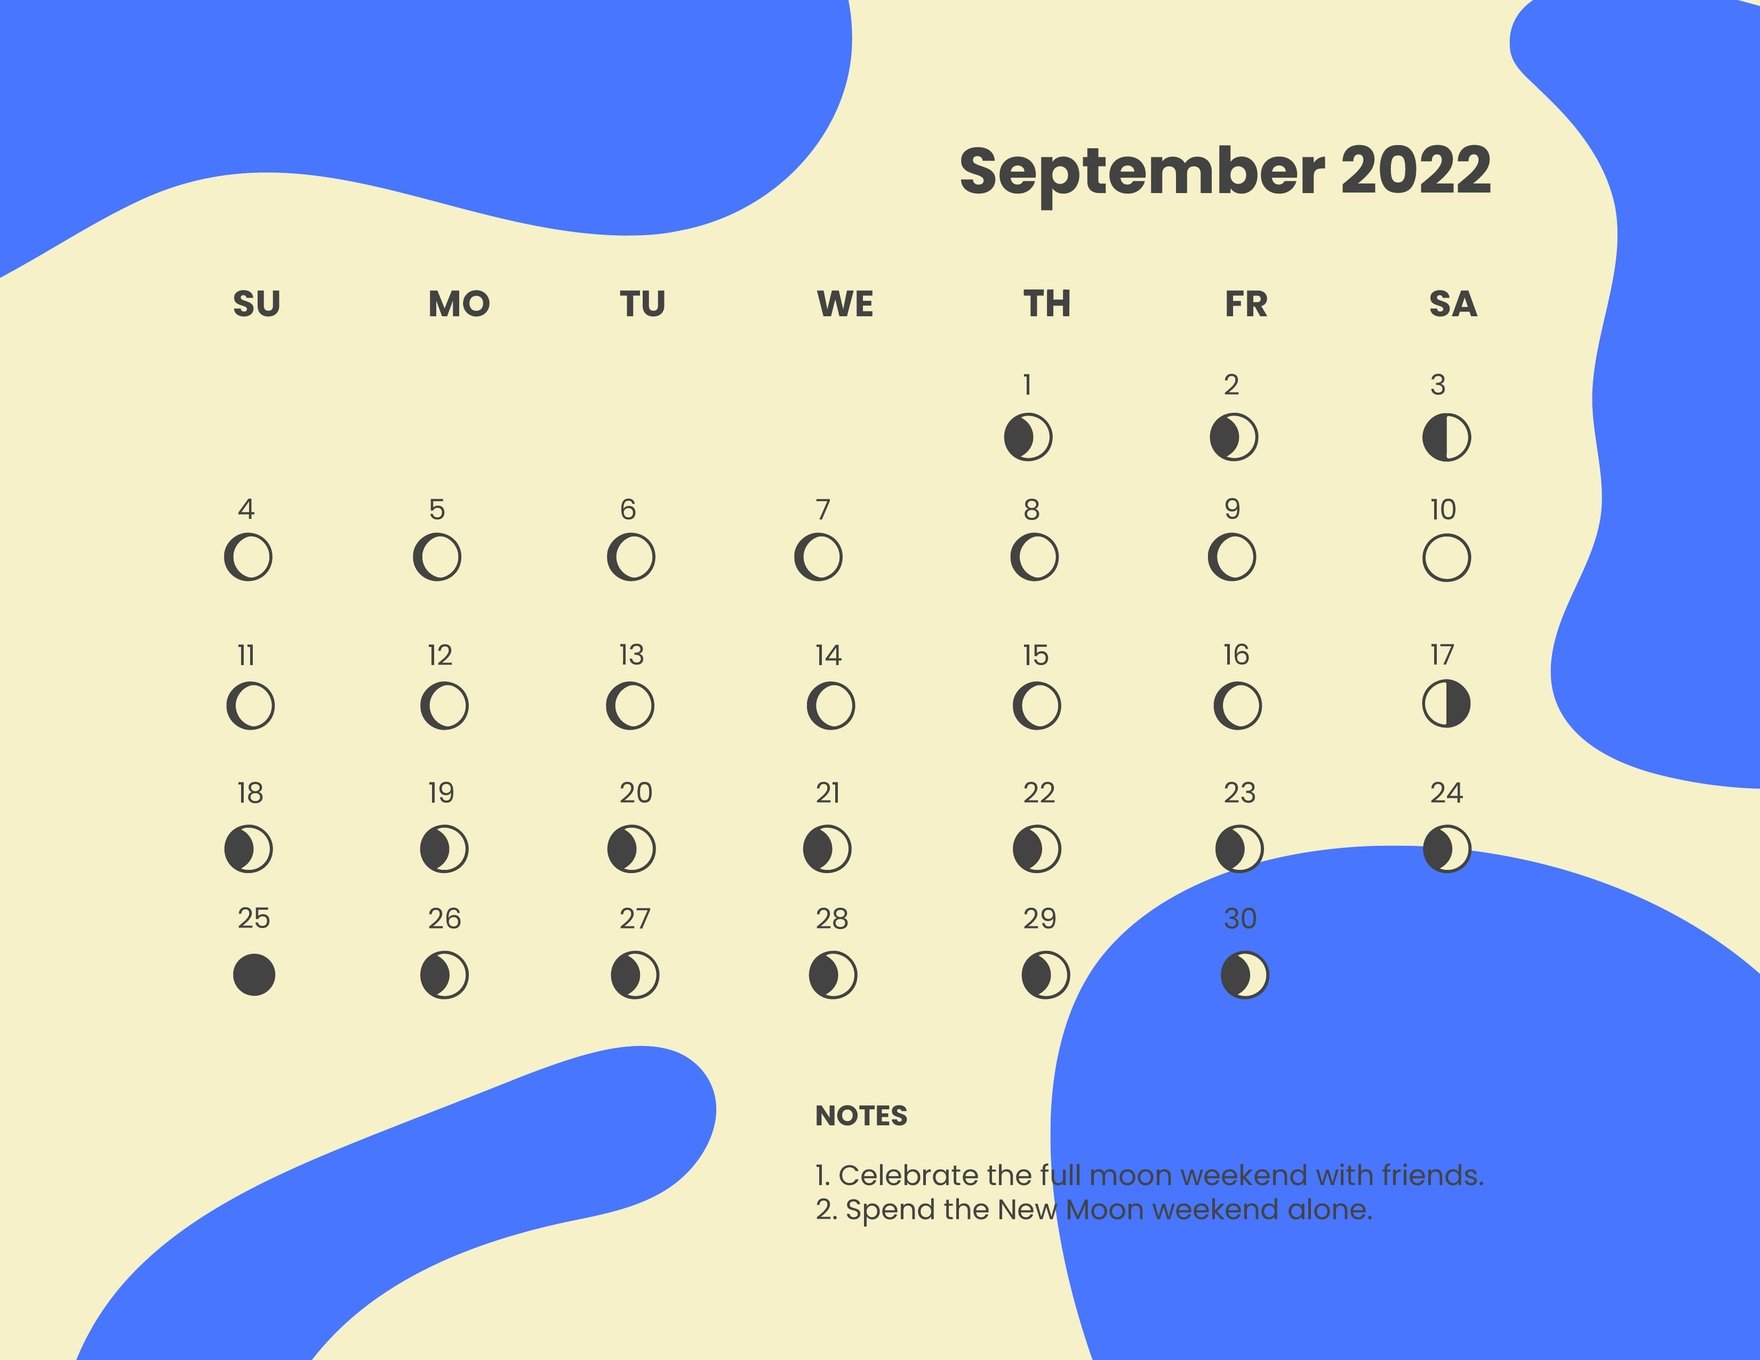 Free September 2022 Calendar Template With Moon Phases in Word, Illustrator, PSD